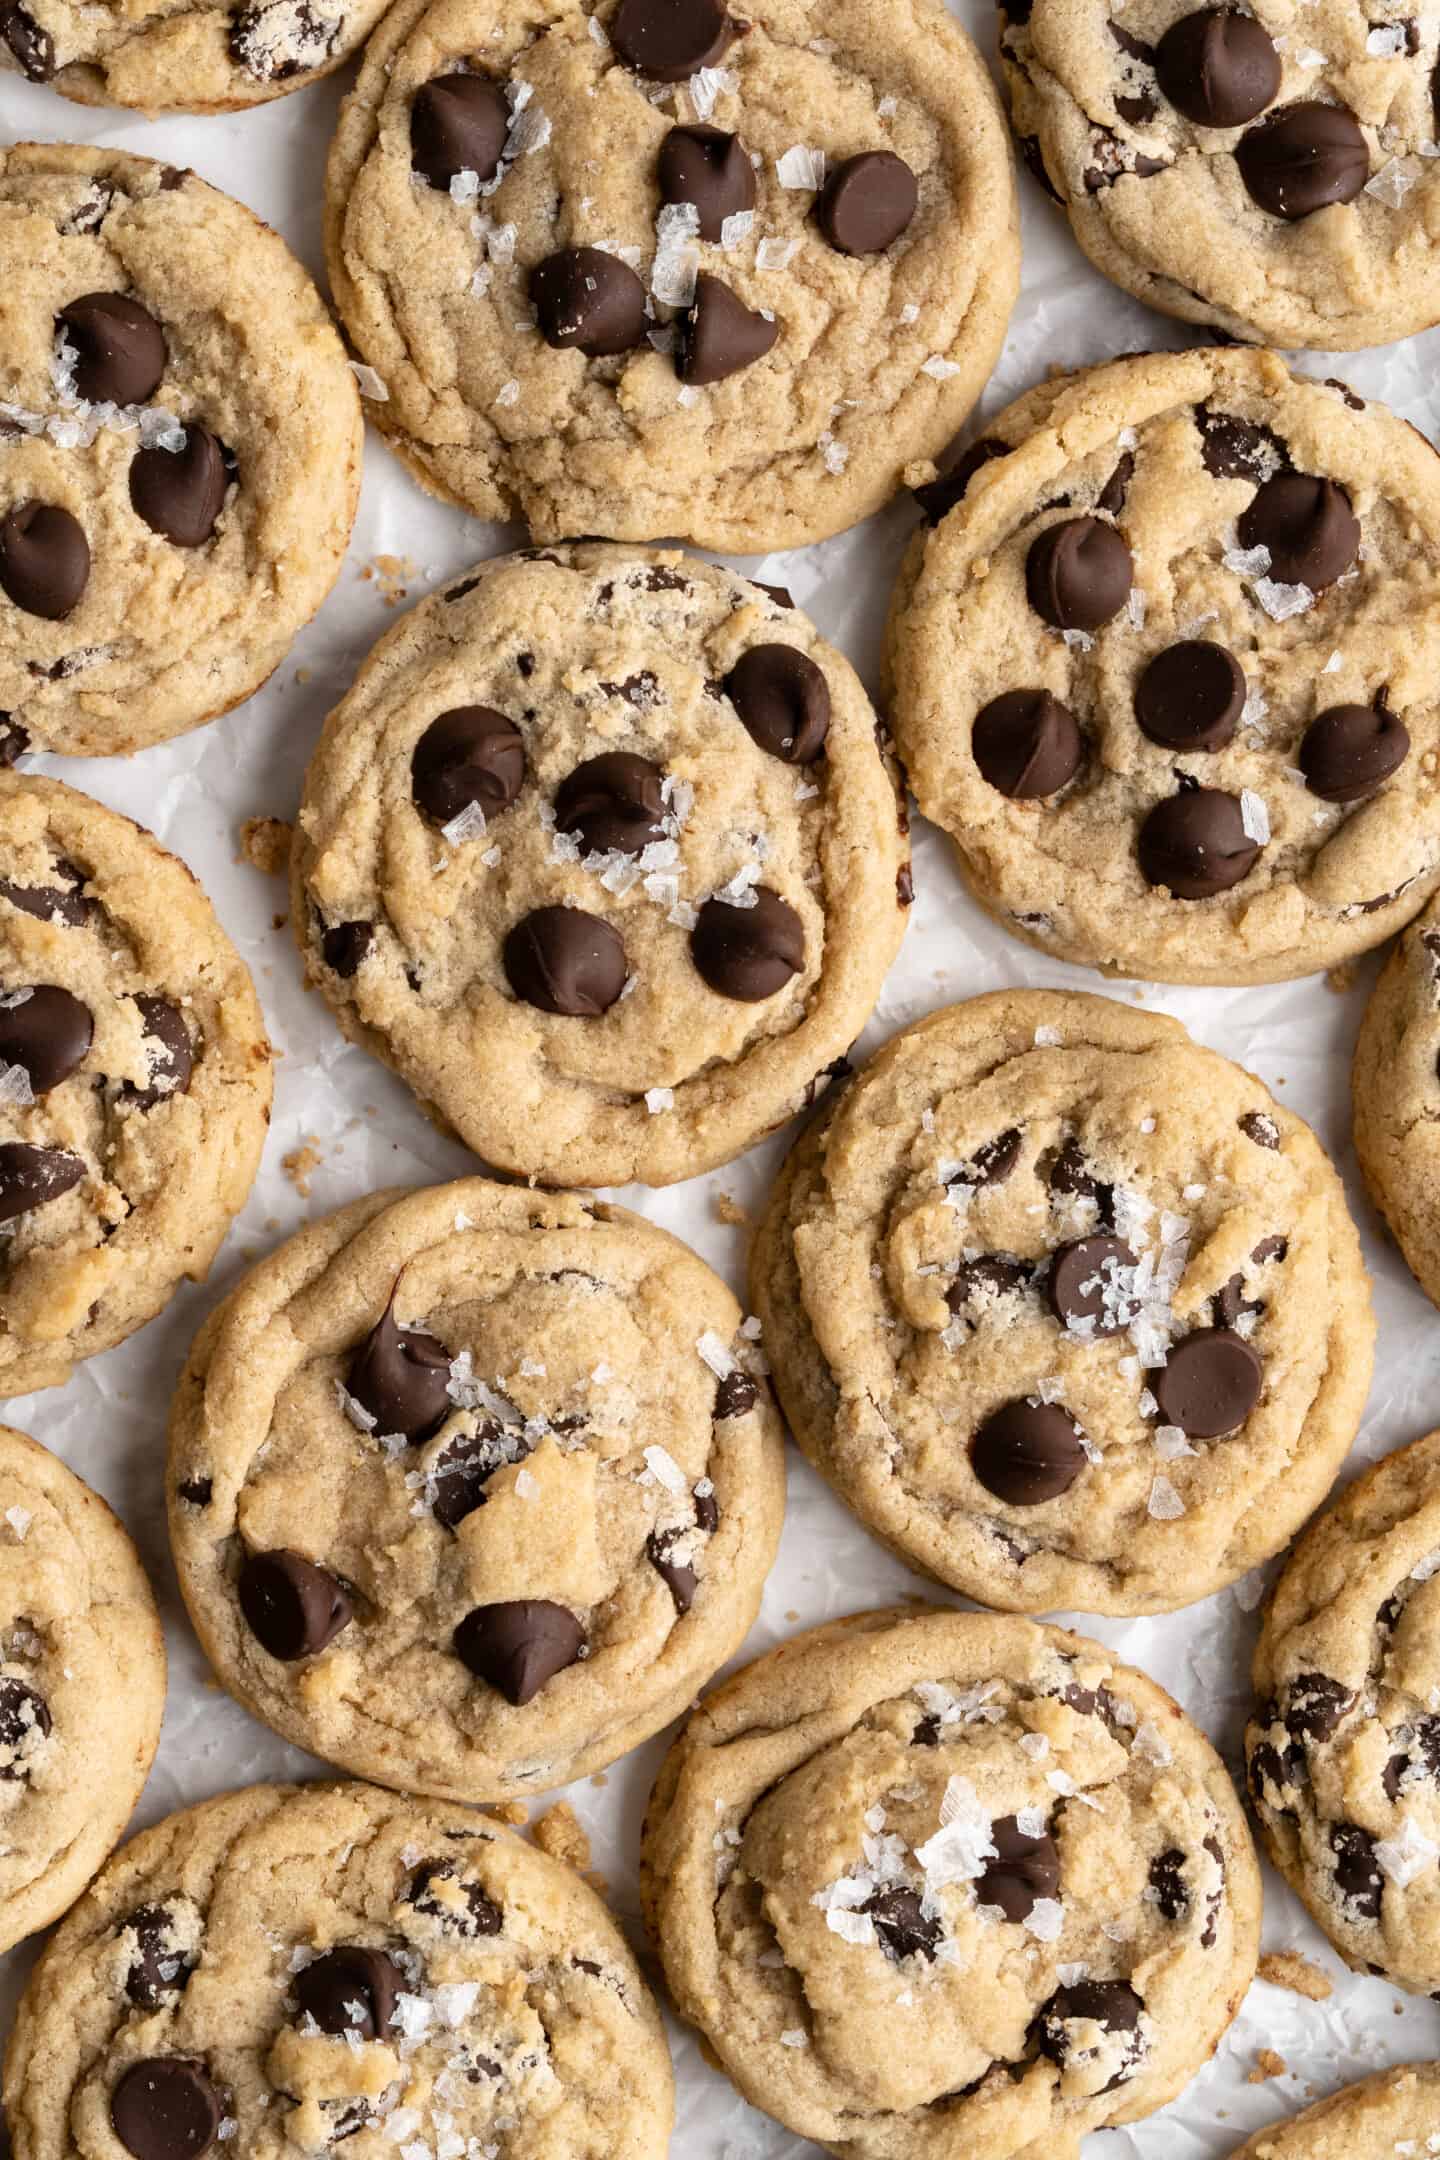 close up of Vegan chocolate chip cookies on parchment paper